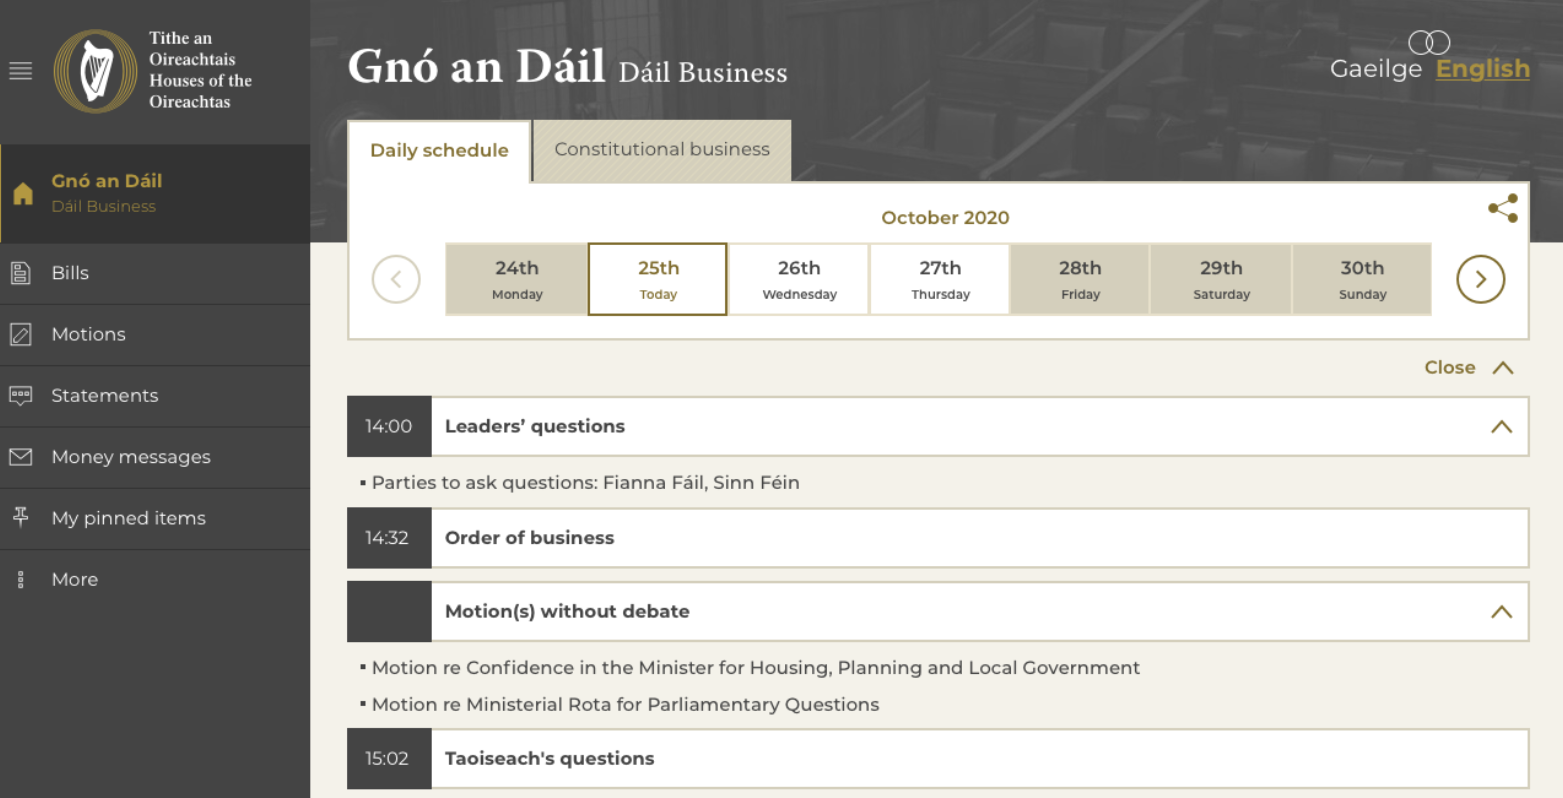 Graphic from Dáil Business website